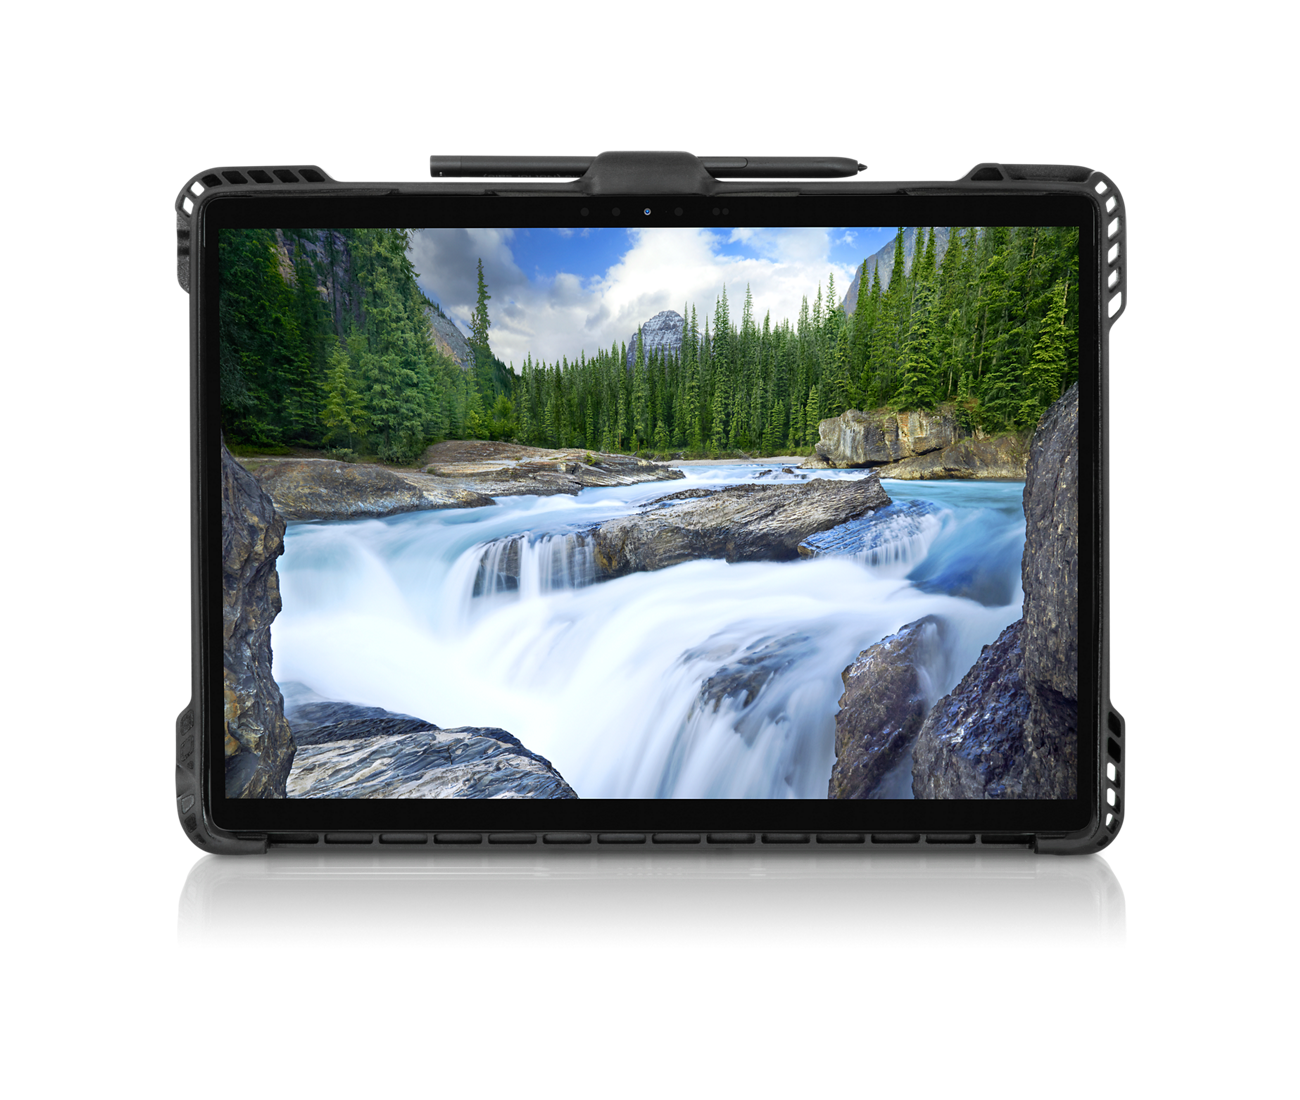 Dell Commercial Grade Case - tablet PC protective case